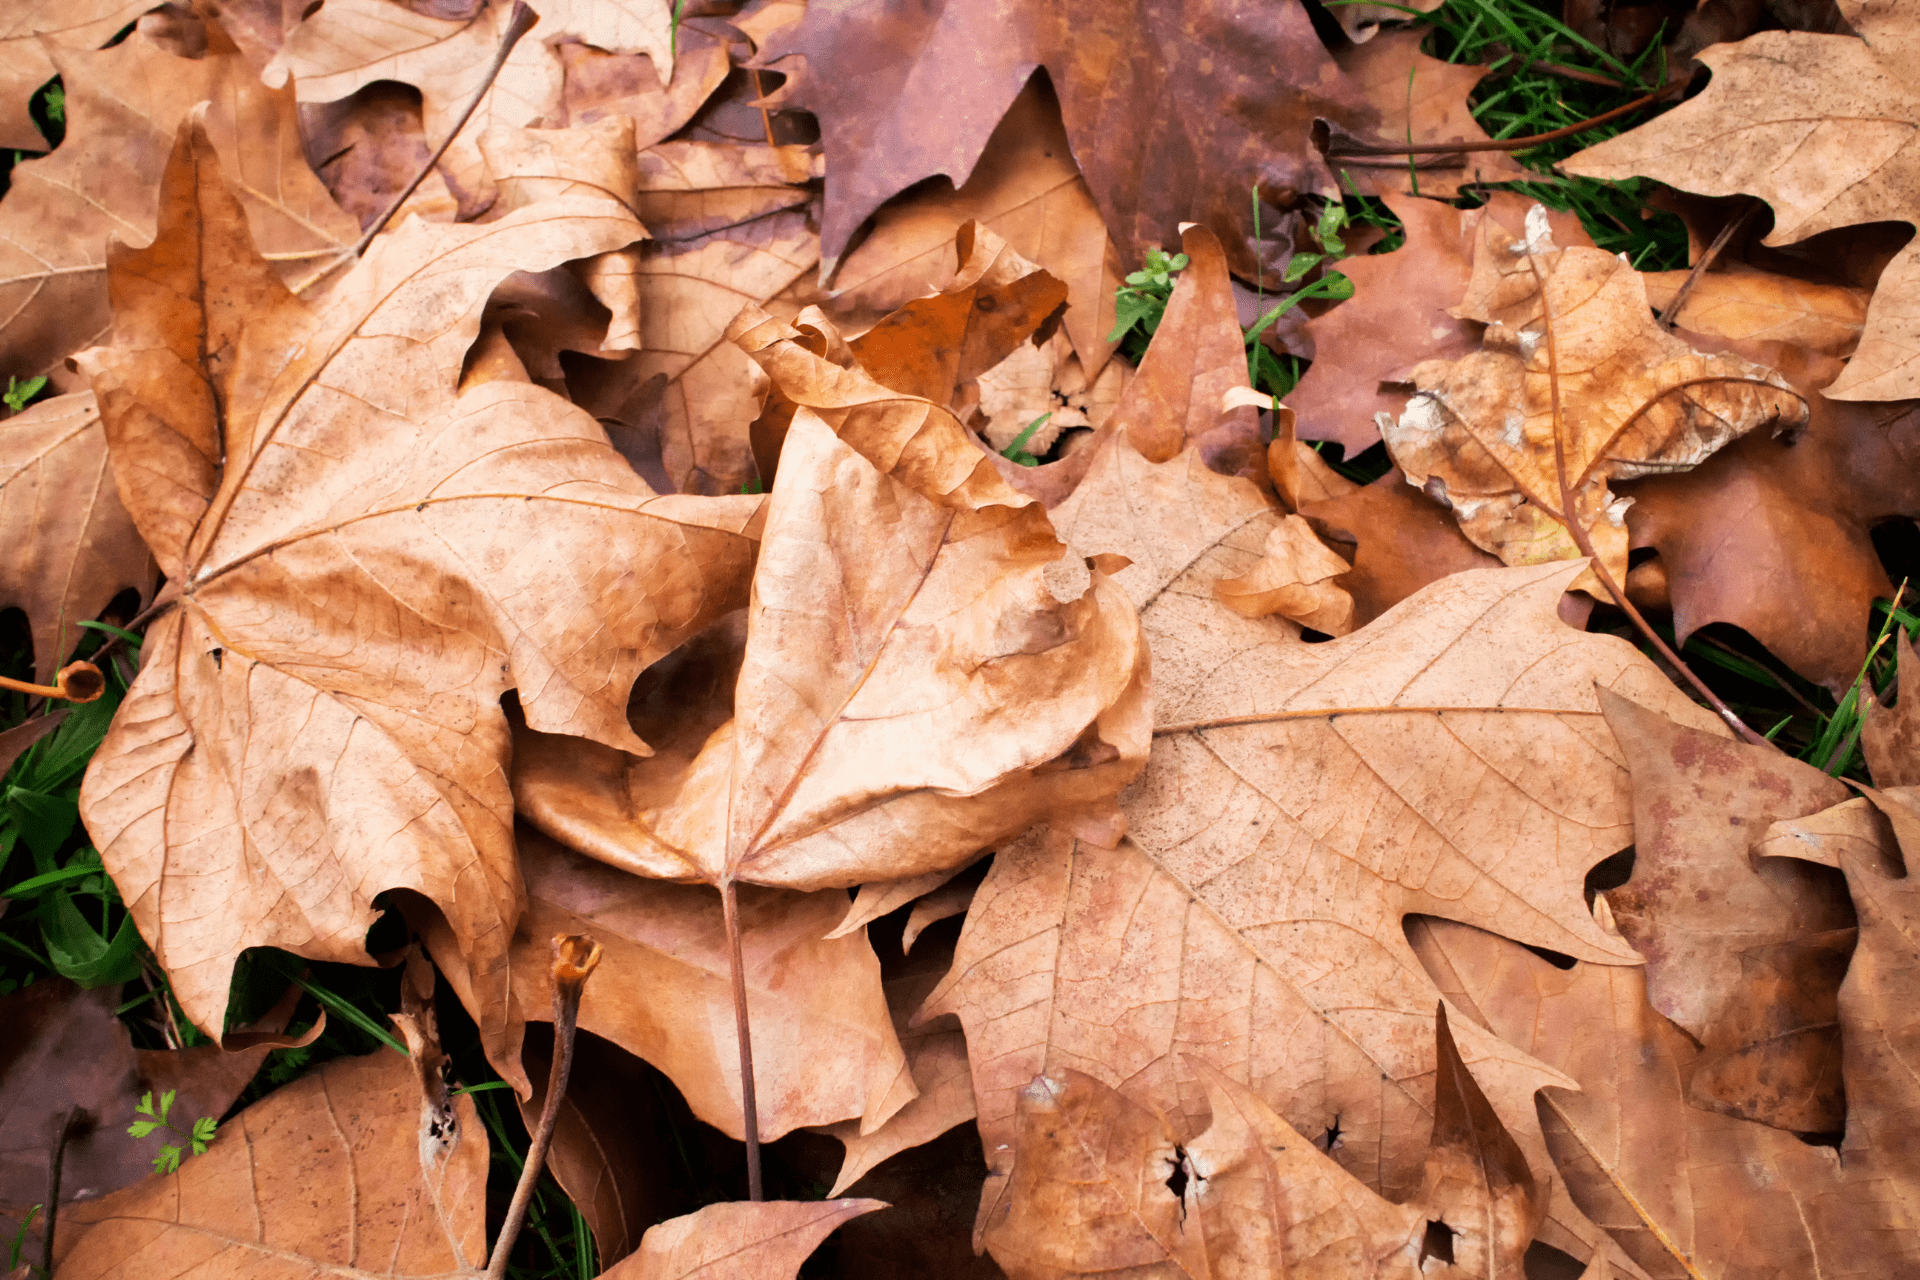 Autumn’s Blanket: The Impacts of Dead Leaf Accumulation